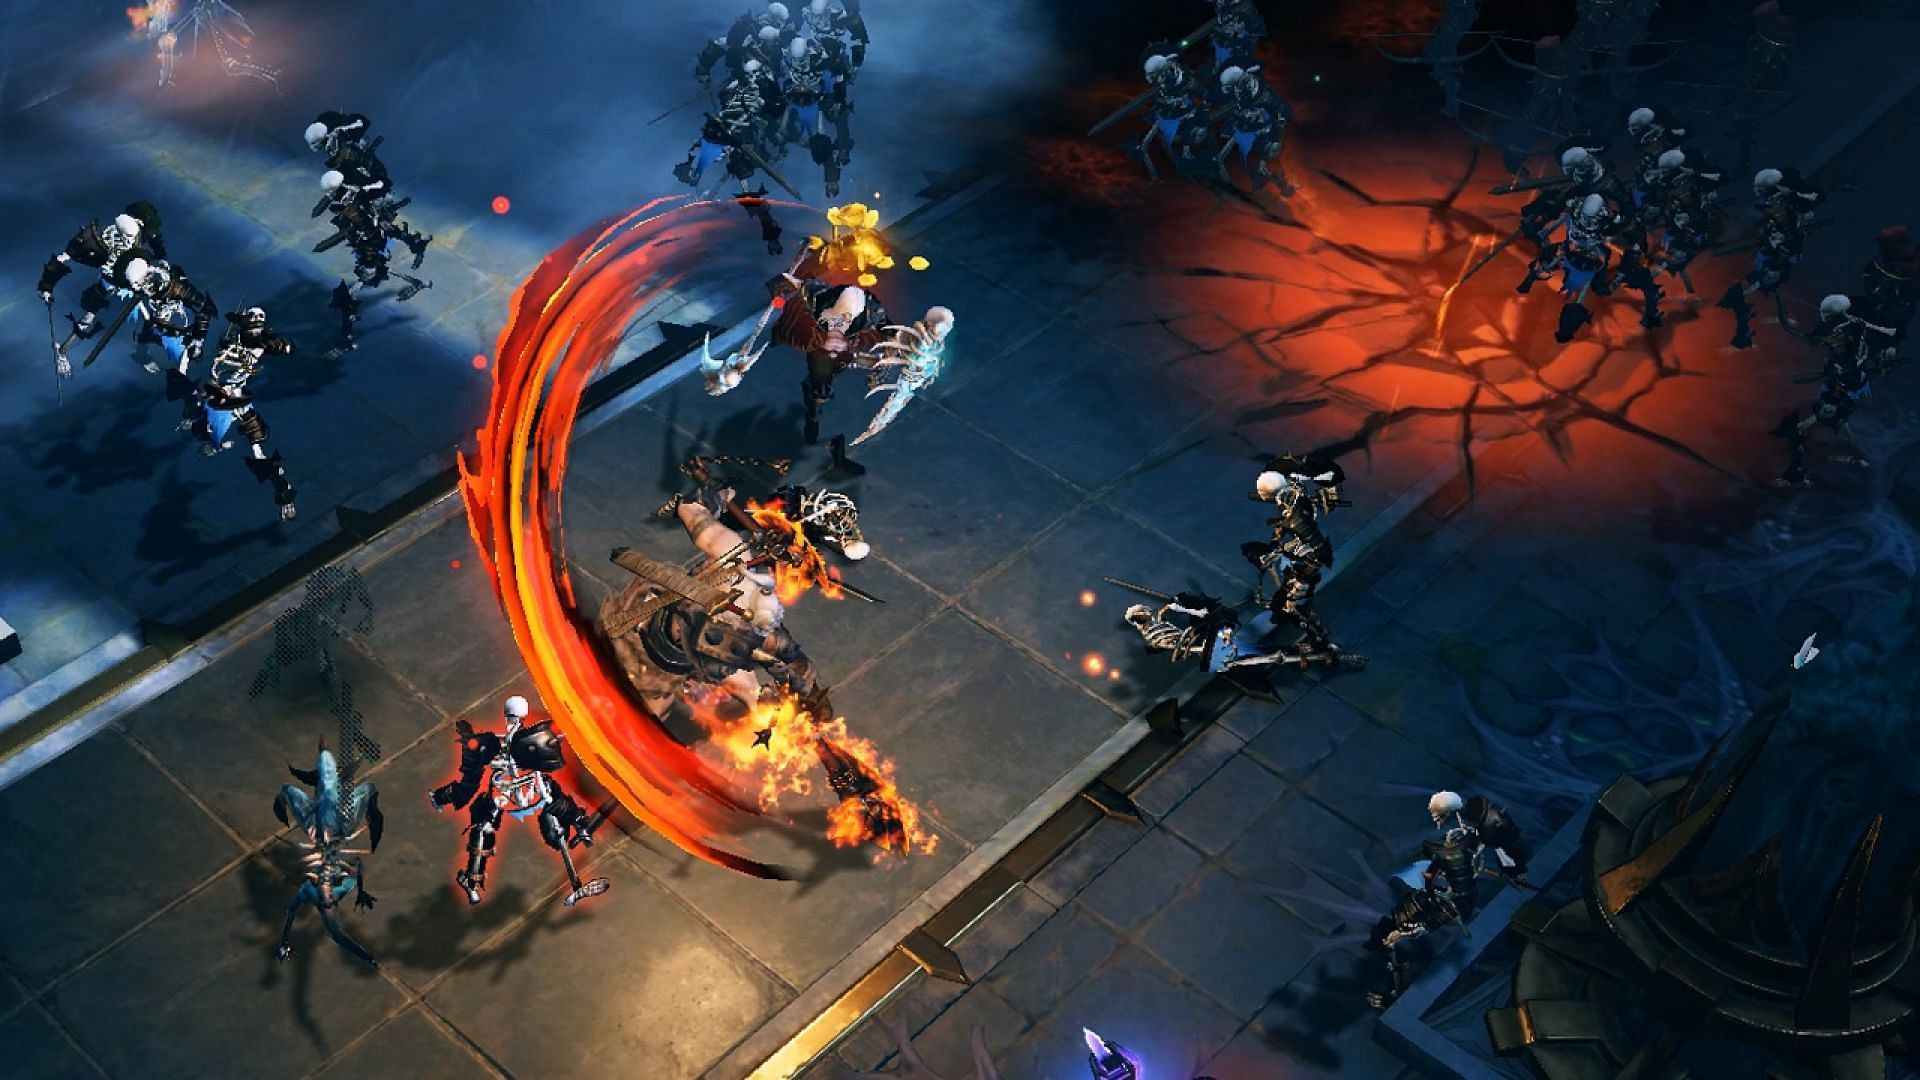 Loyal players are facing yet another set back in Diablo Immortal (Image via Blizzard Entertainment/Diablo Immortal)